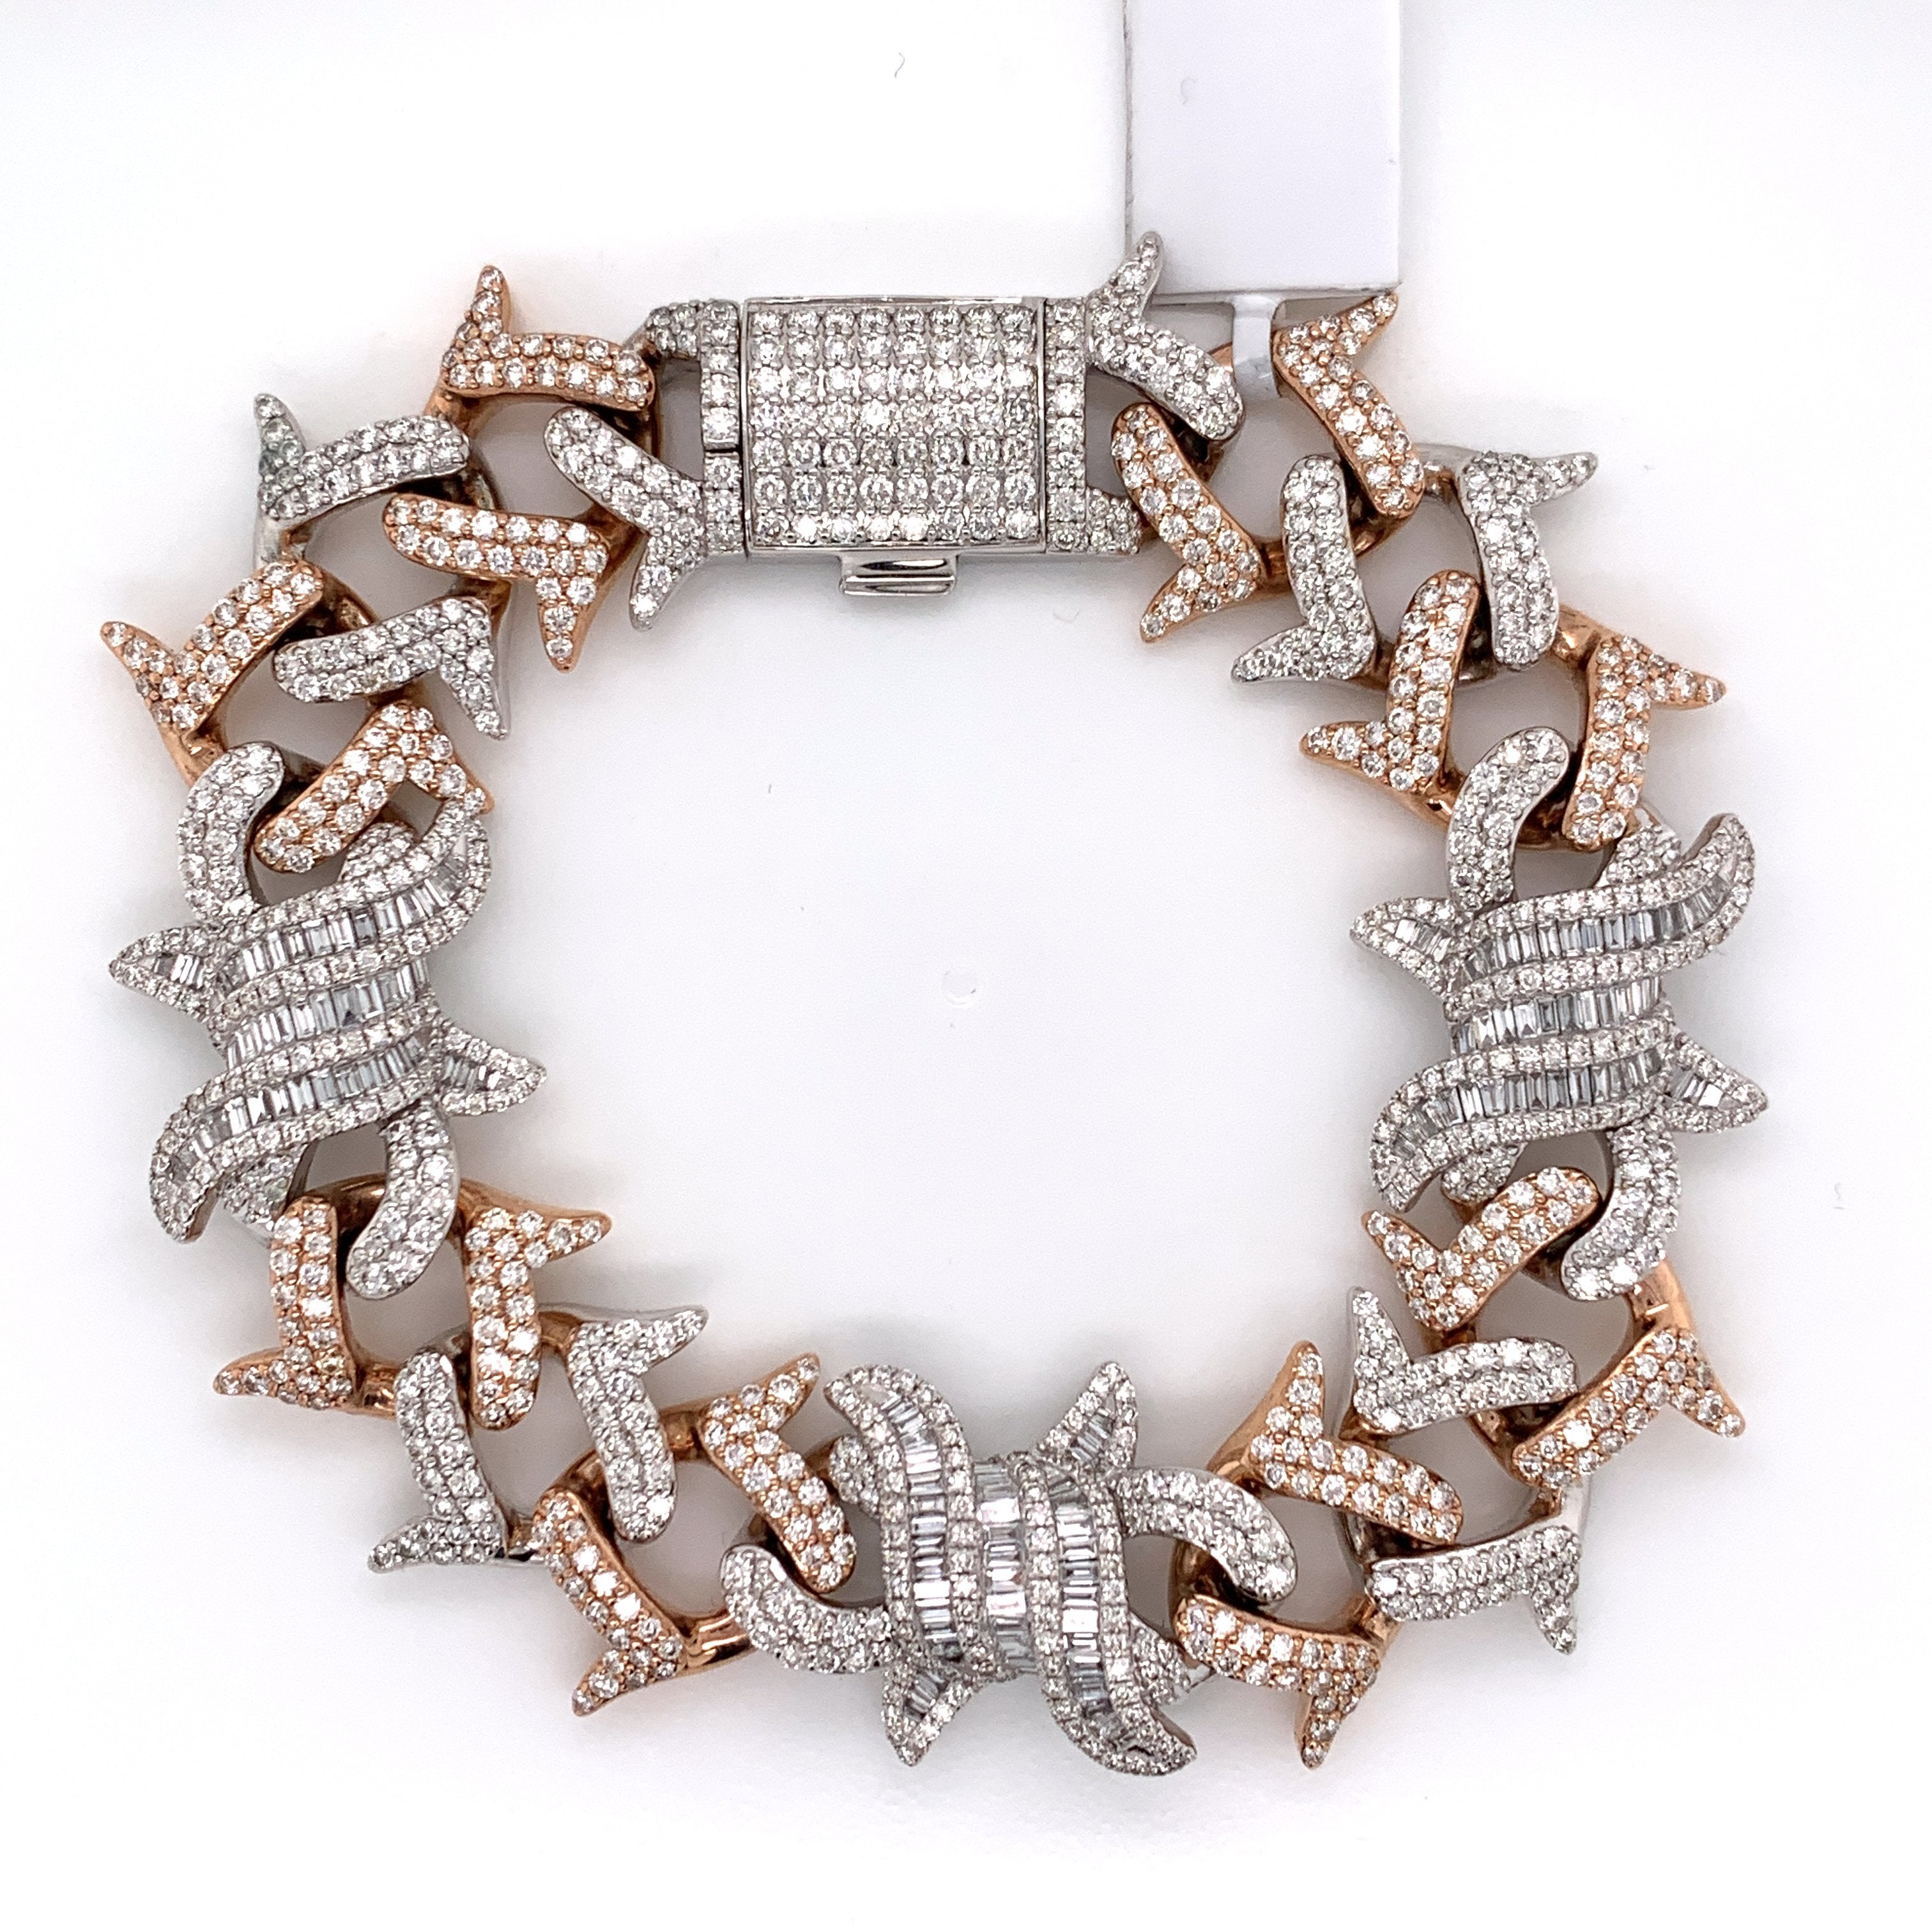 11.00CT Diamond Barbed Wire Bracelet in 14K Rose and White Gold - 13mm - White Carat Diamonds 